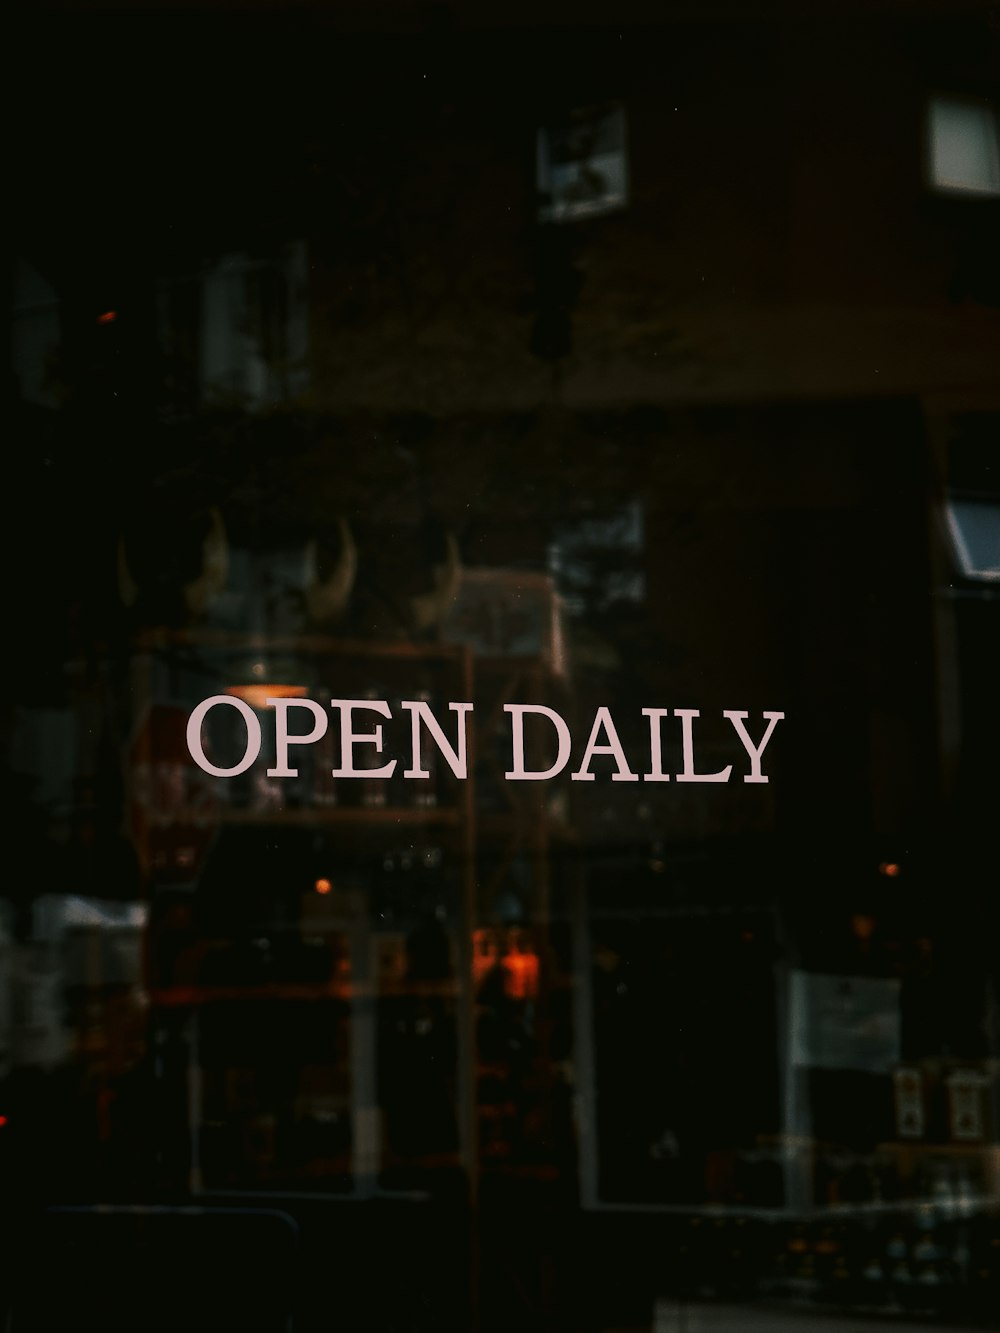 an open daily sign is reflected in a window